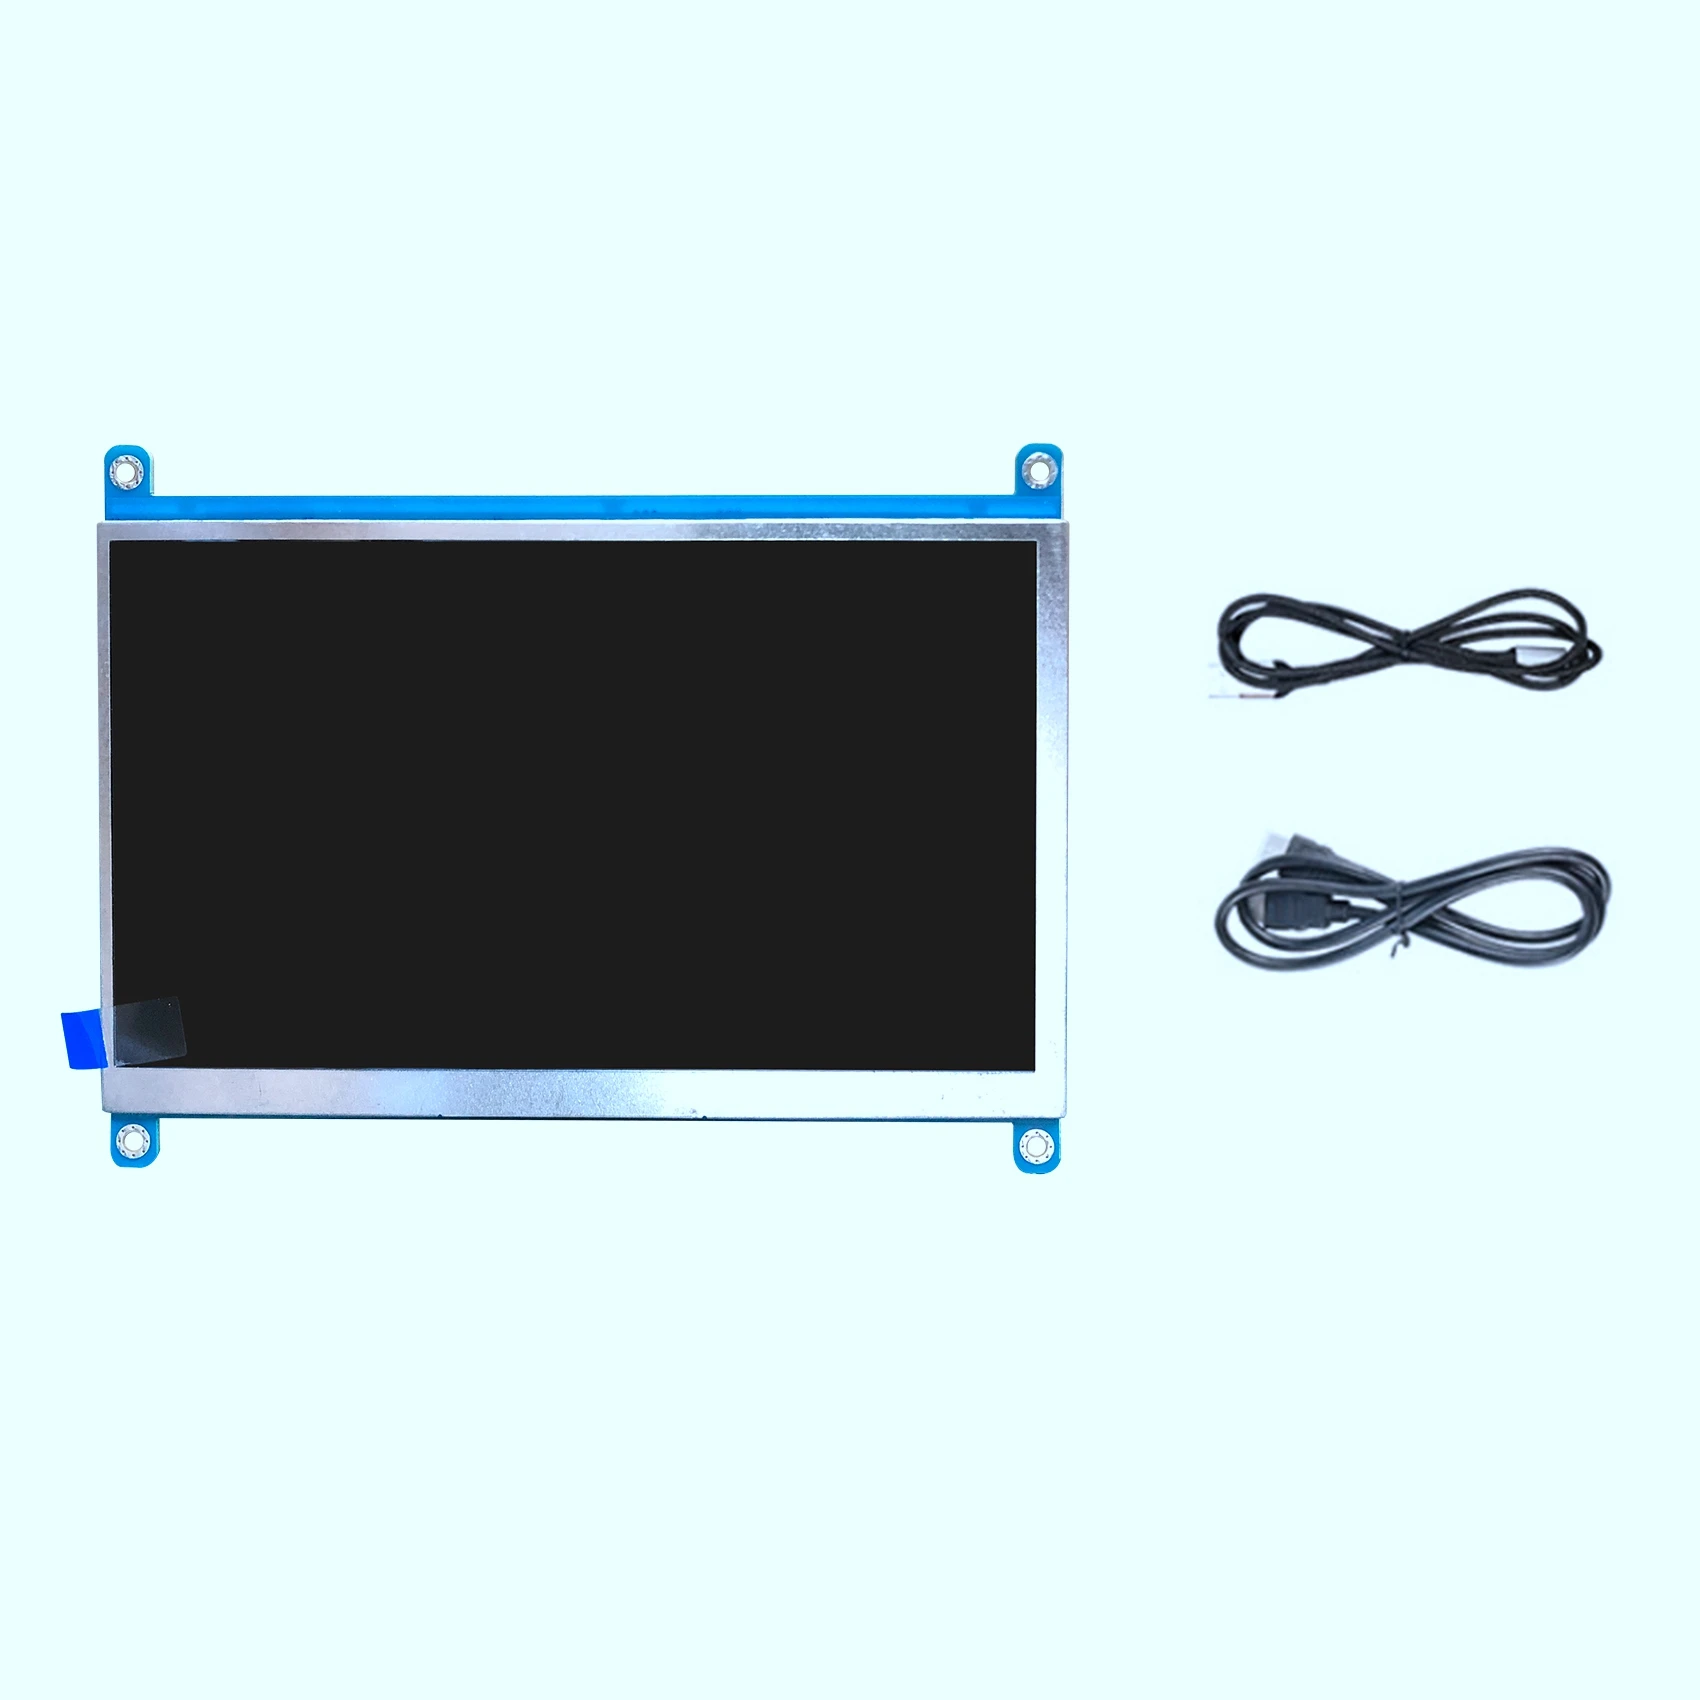 

7 Inch IPS Capacitive NO Touch Screen Monitor 1024X600 HD Display HDMI-Compatible VGA Interface Display for Raspberry Pi